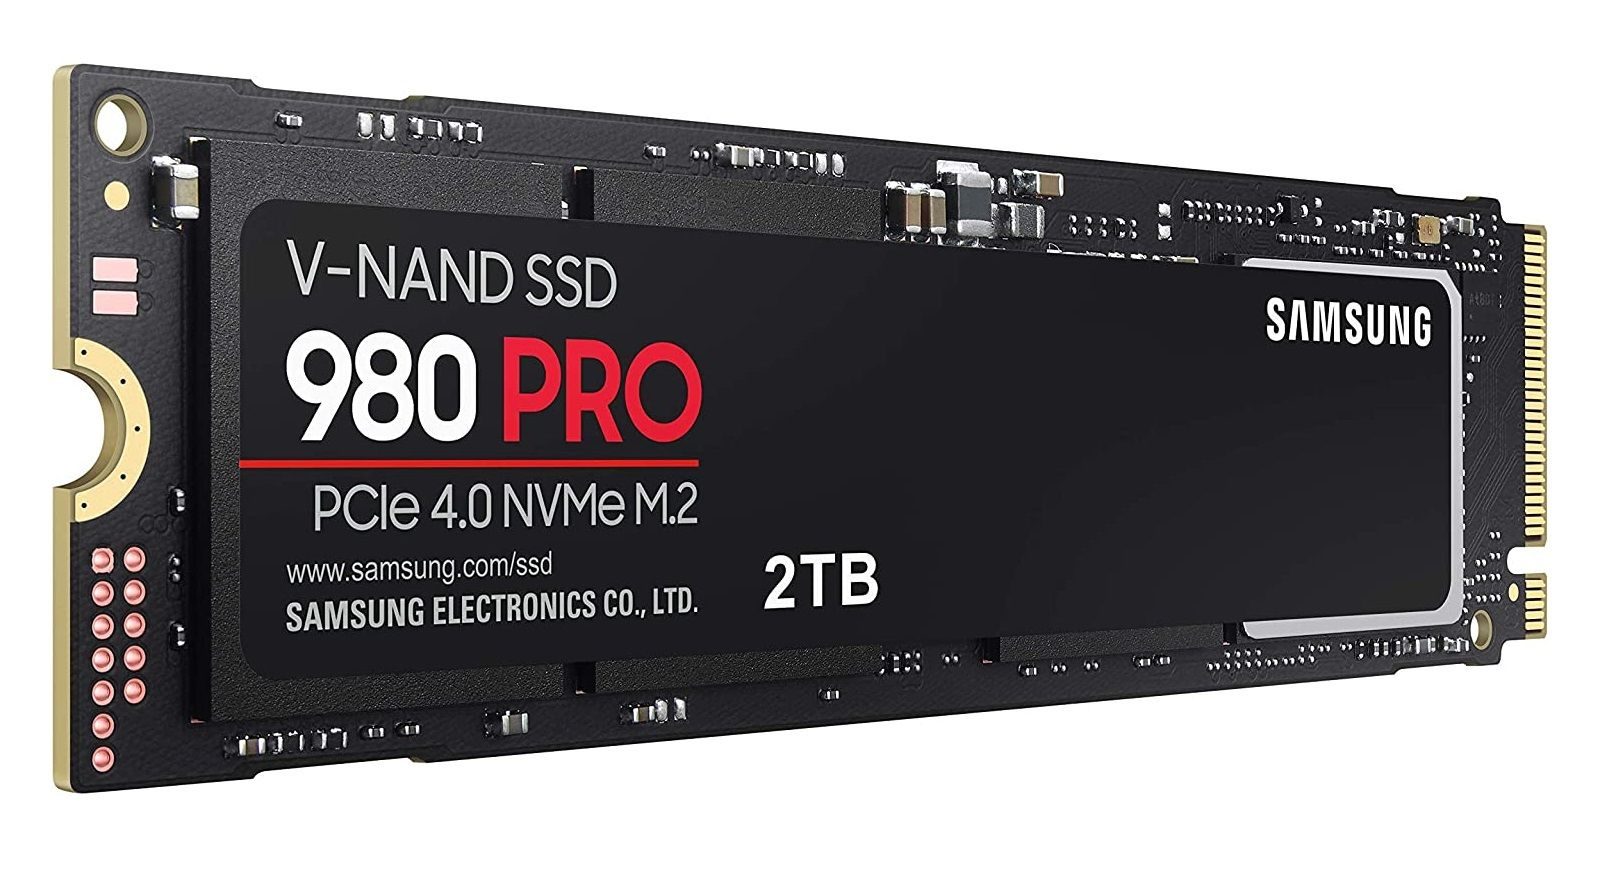 SAMSUNG 980 PRO SSD Featured